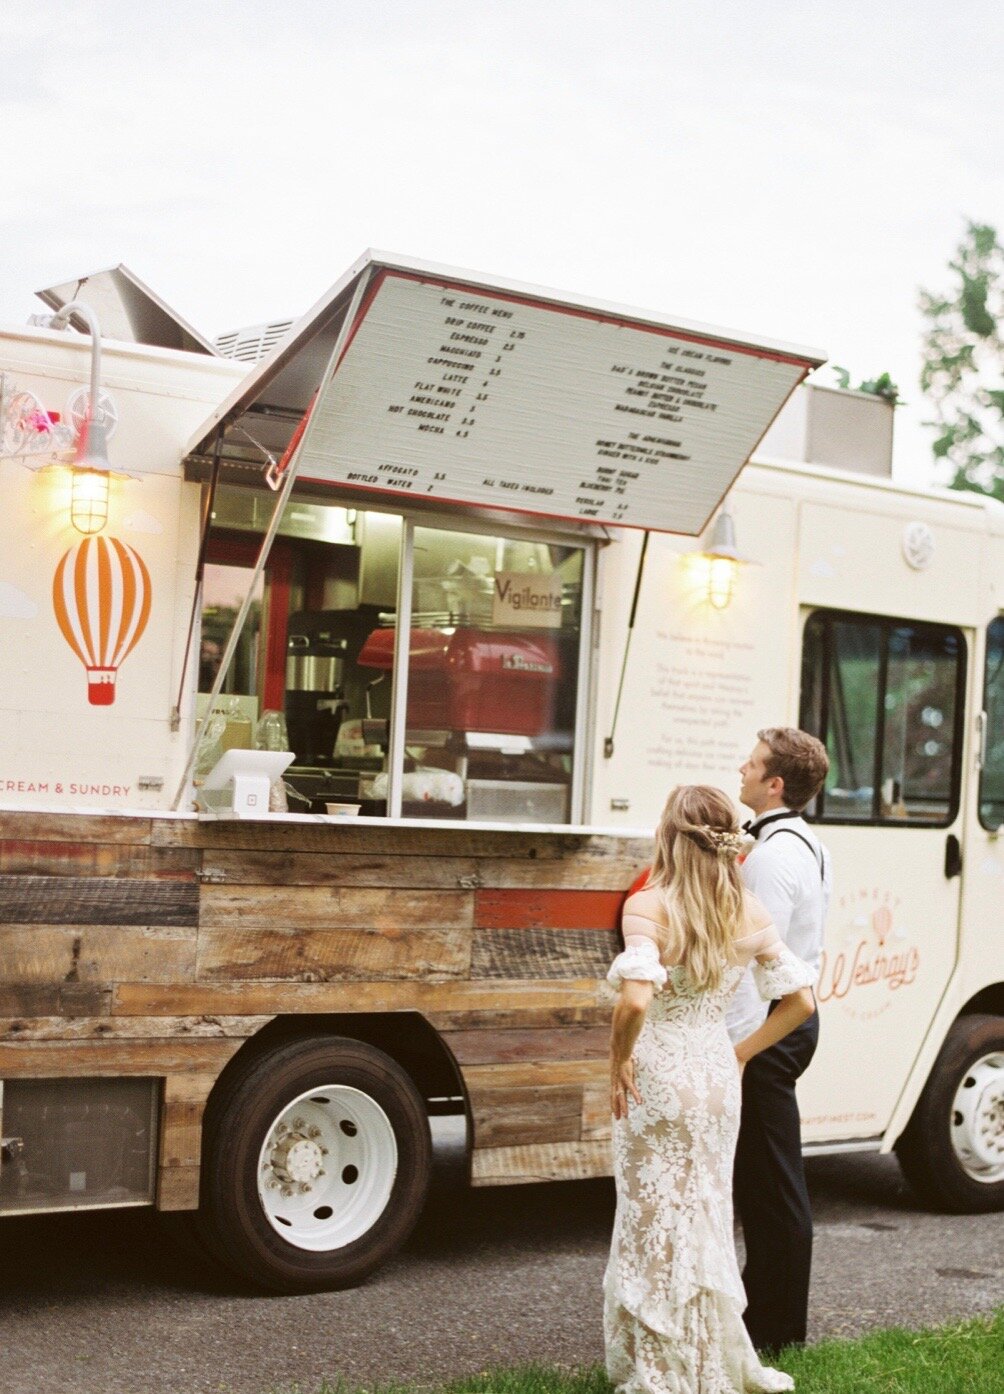 HOW TO HAVE AN EPIC FOOD TRUCK WEDDING — IRIE EVENT DESIGN